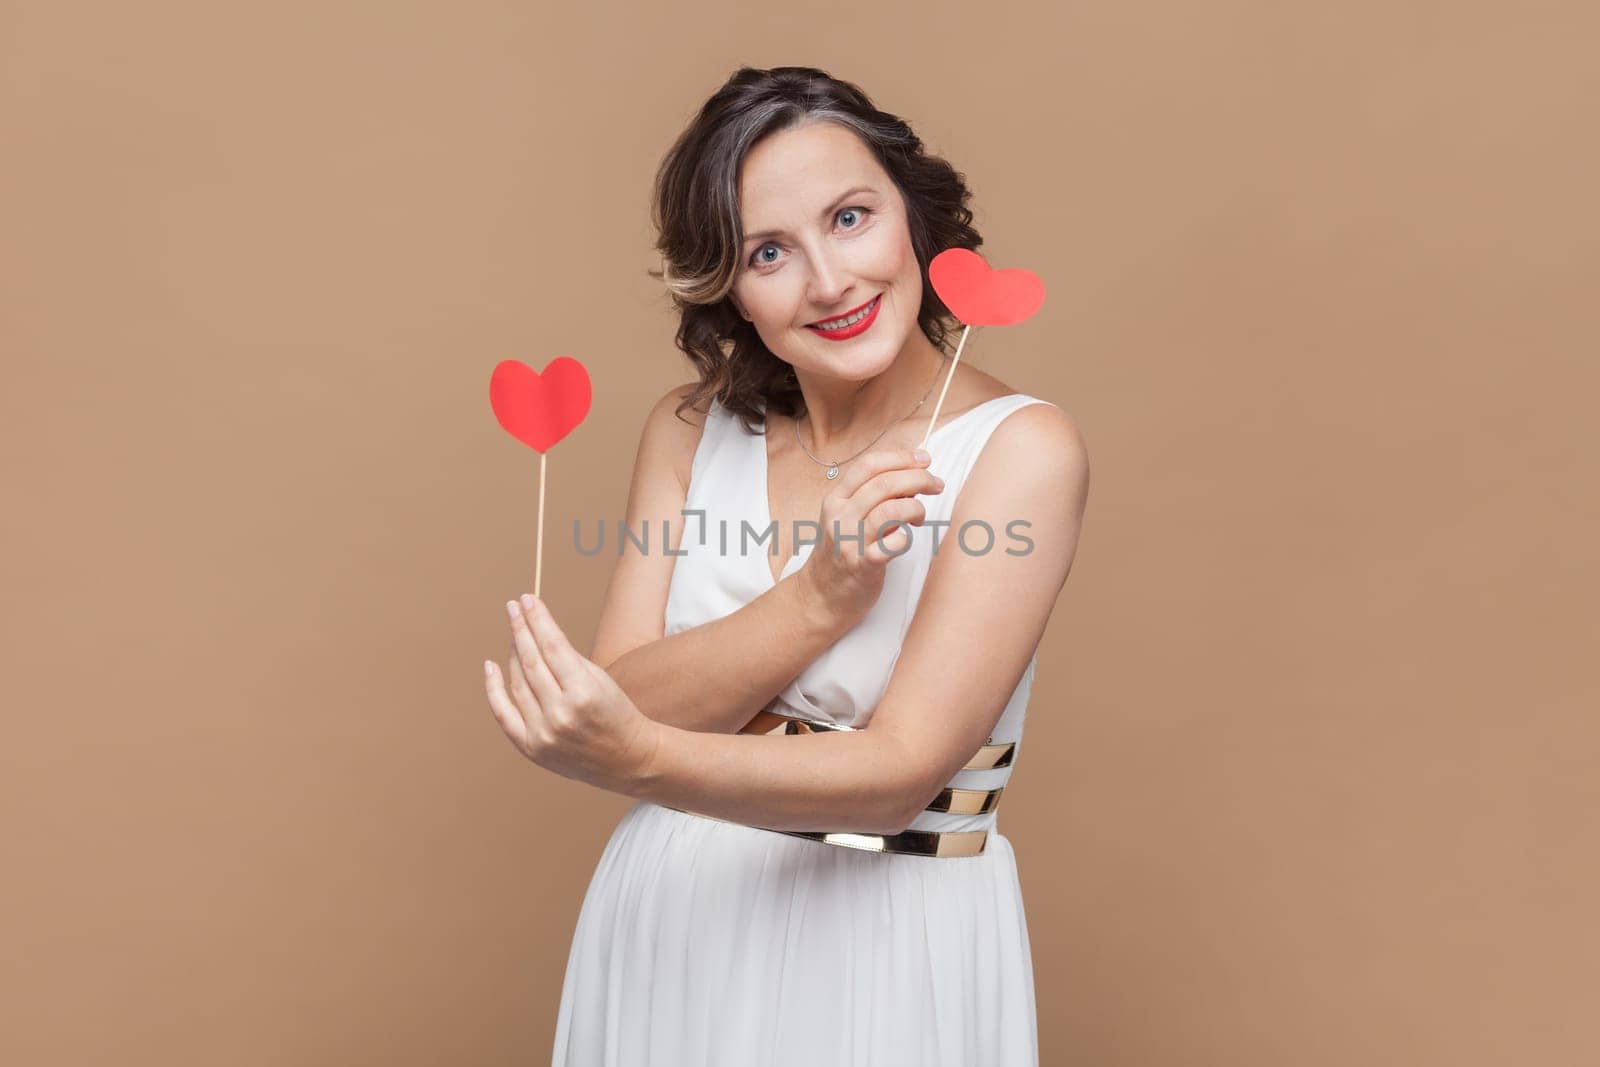 Portrait of cute charming middle aged woman with wavy hair holding little red hearts on sticks, looking smiling at camera, wearing white dress. Indoor studio shot isolated on light brown background.